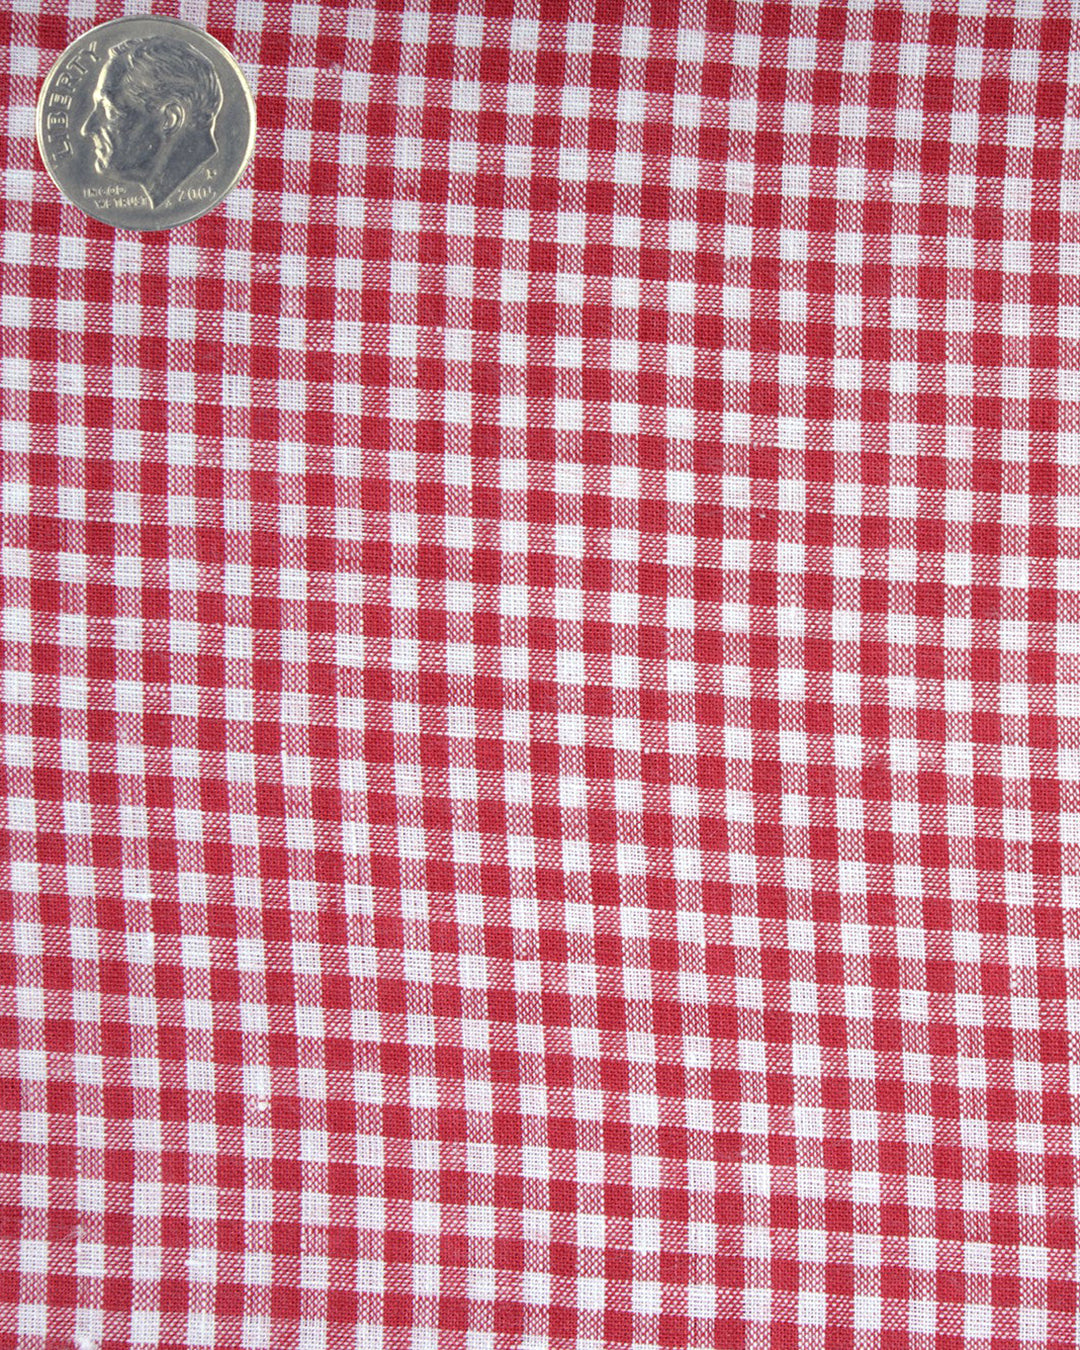 Close up of the custom linen shirt for men in red gingham by Luxire Clothing